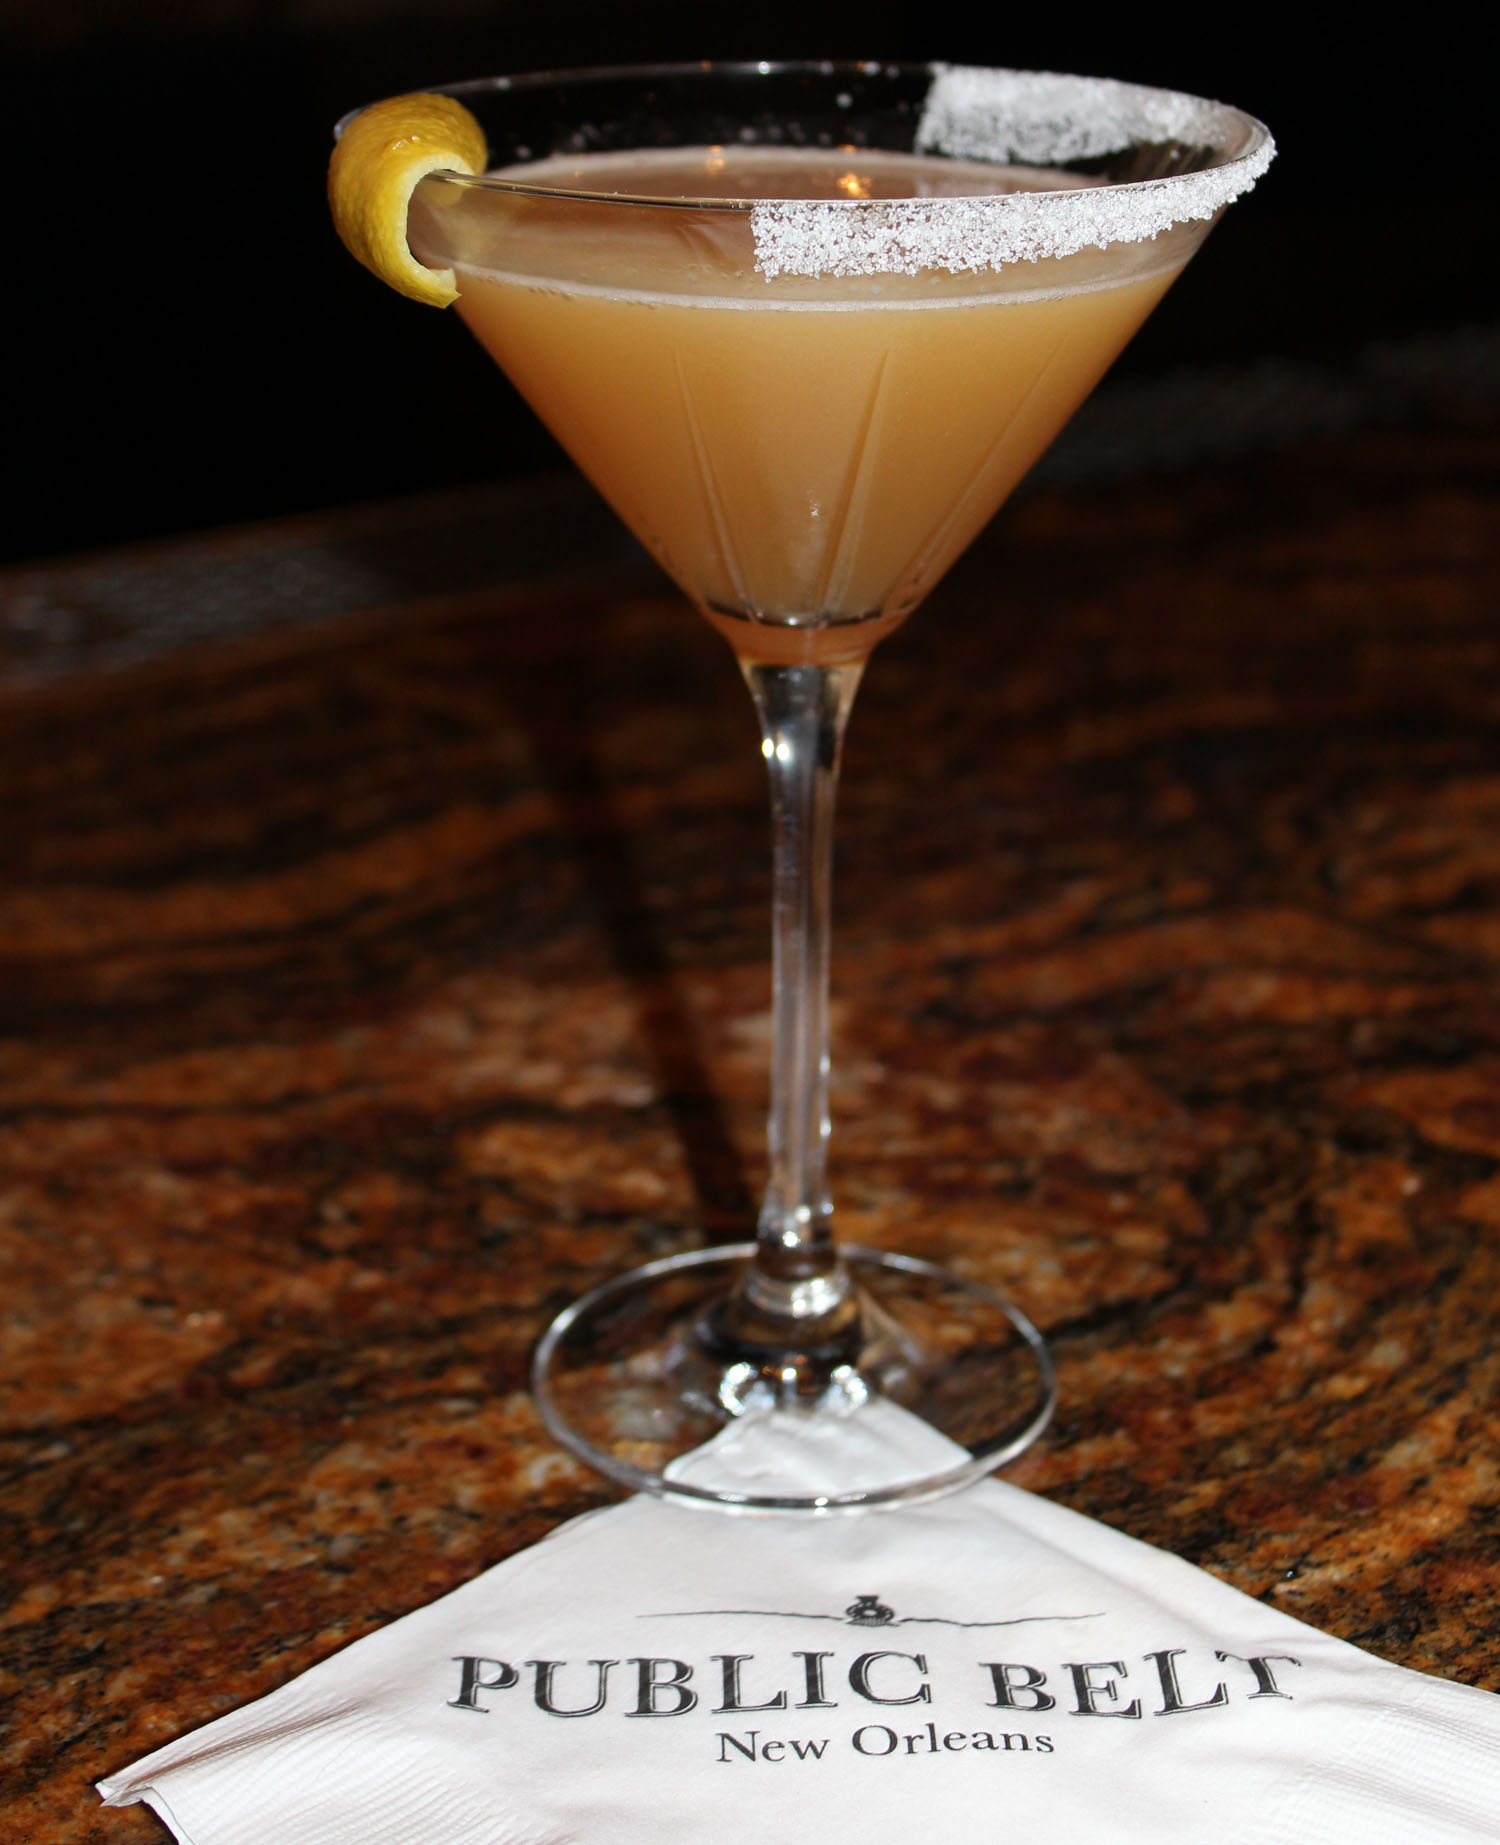 The Hilton New Orleans Riverside’s $150 Grand Sidecar is made with Grand Marnier Quintessence Grand Cuvee liqueur.